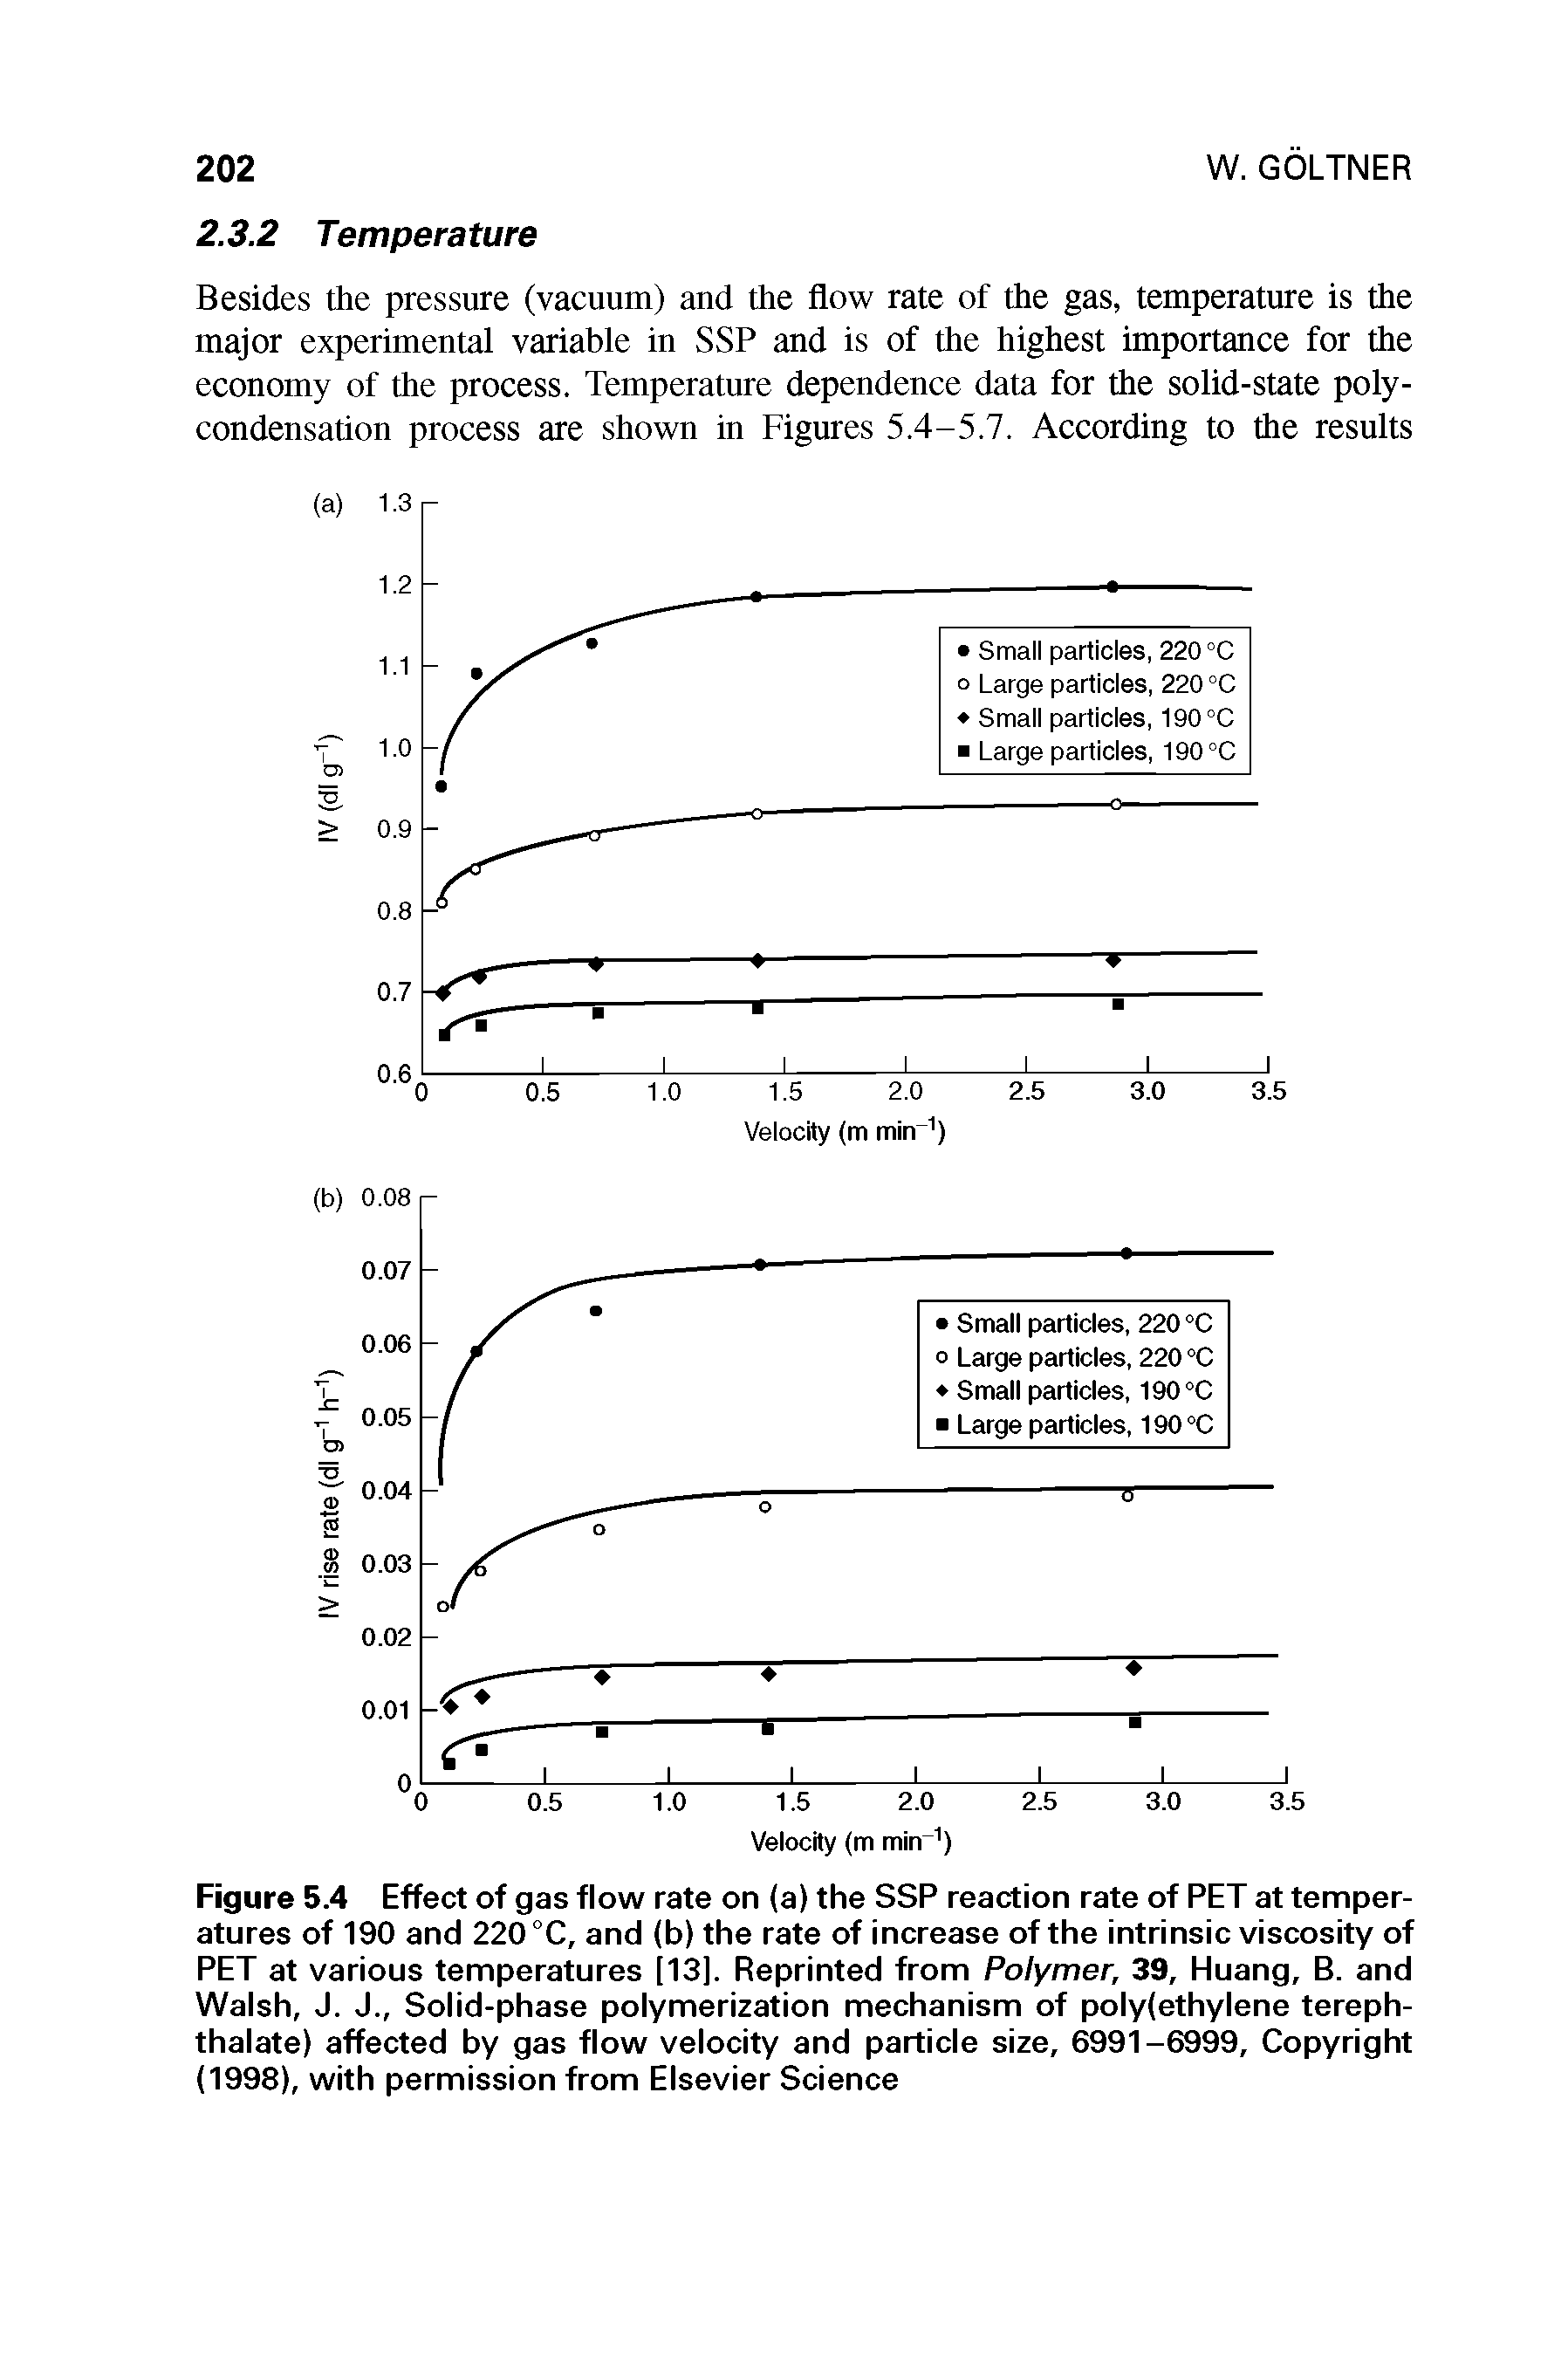 Figure 5.4 Effect of gas flow rate on (a) the SSP reaction rate of PET at temperatures of 190 and 220 °C, and (b) the rate of increase of the intrinsic viscosity of PET at various temperatures [13]. Reprinted from Polymer, 39, Huang, B. and Walsh, J. J., Solid-phase polymerization mechanism of polyethylene tereph-thalate) affected by gas flow velocity and particle size, 6991-6999, Copyright (1998), with permission from Elsevier Science...